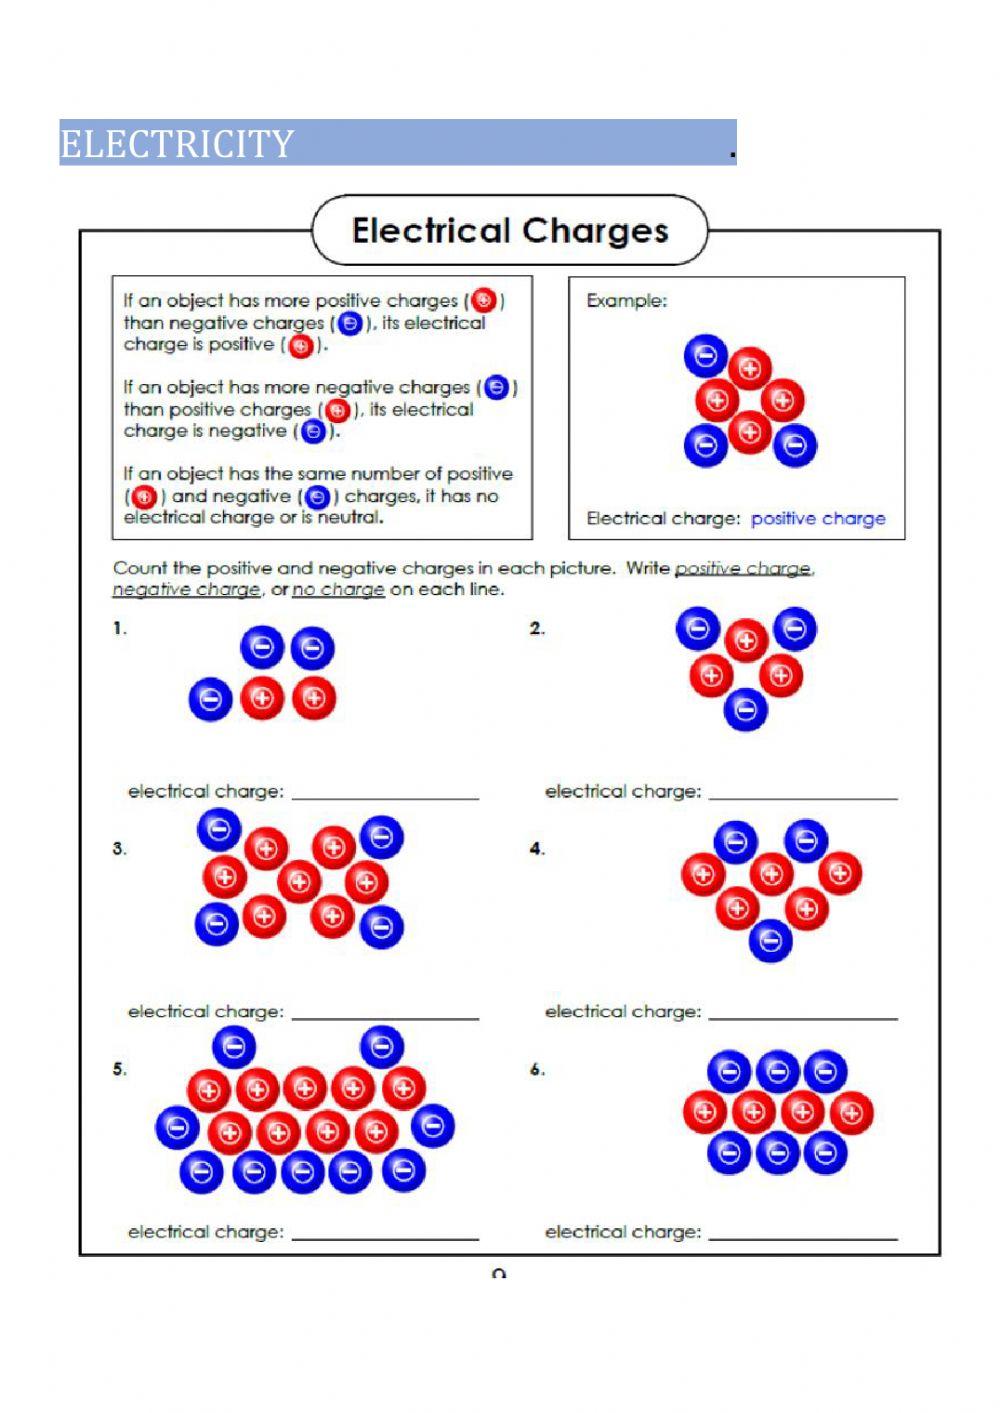 Electriciy charges